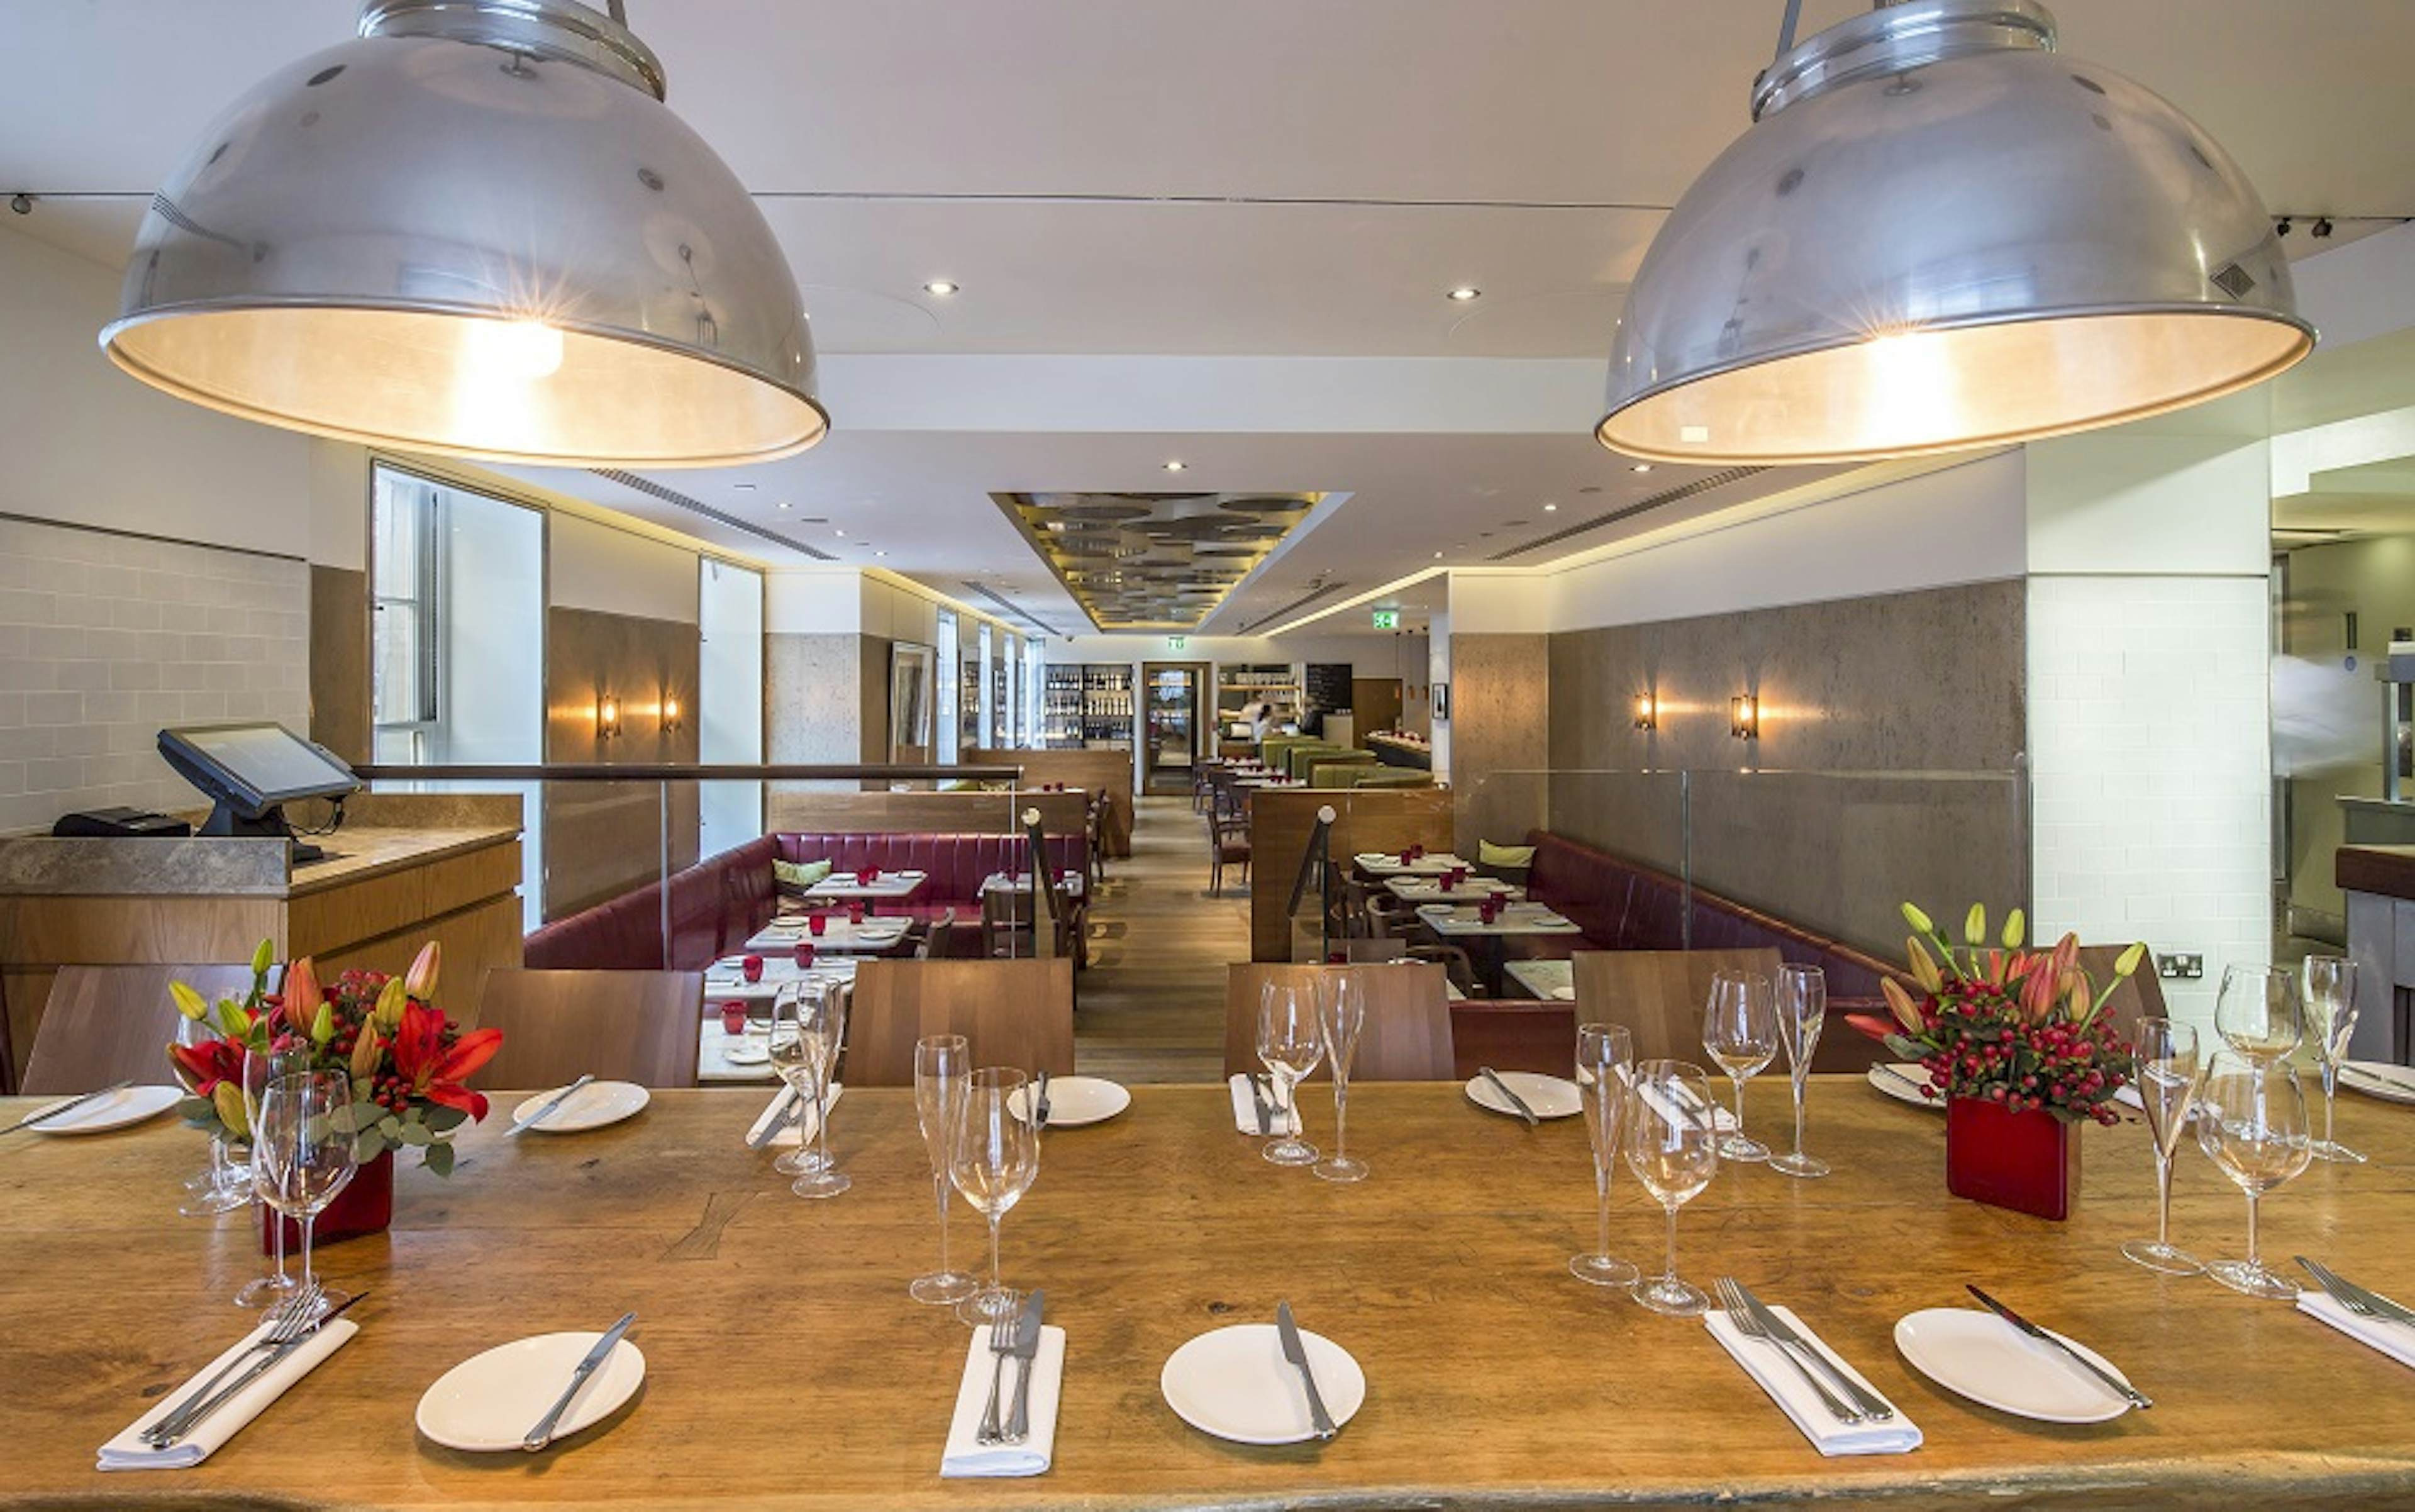 Gordon Ramsey Bar and Grill Mayfair - Exclusive Hire image 1